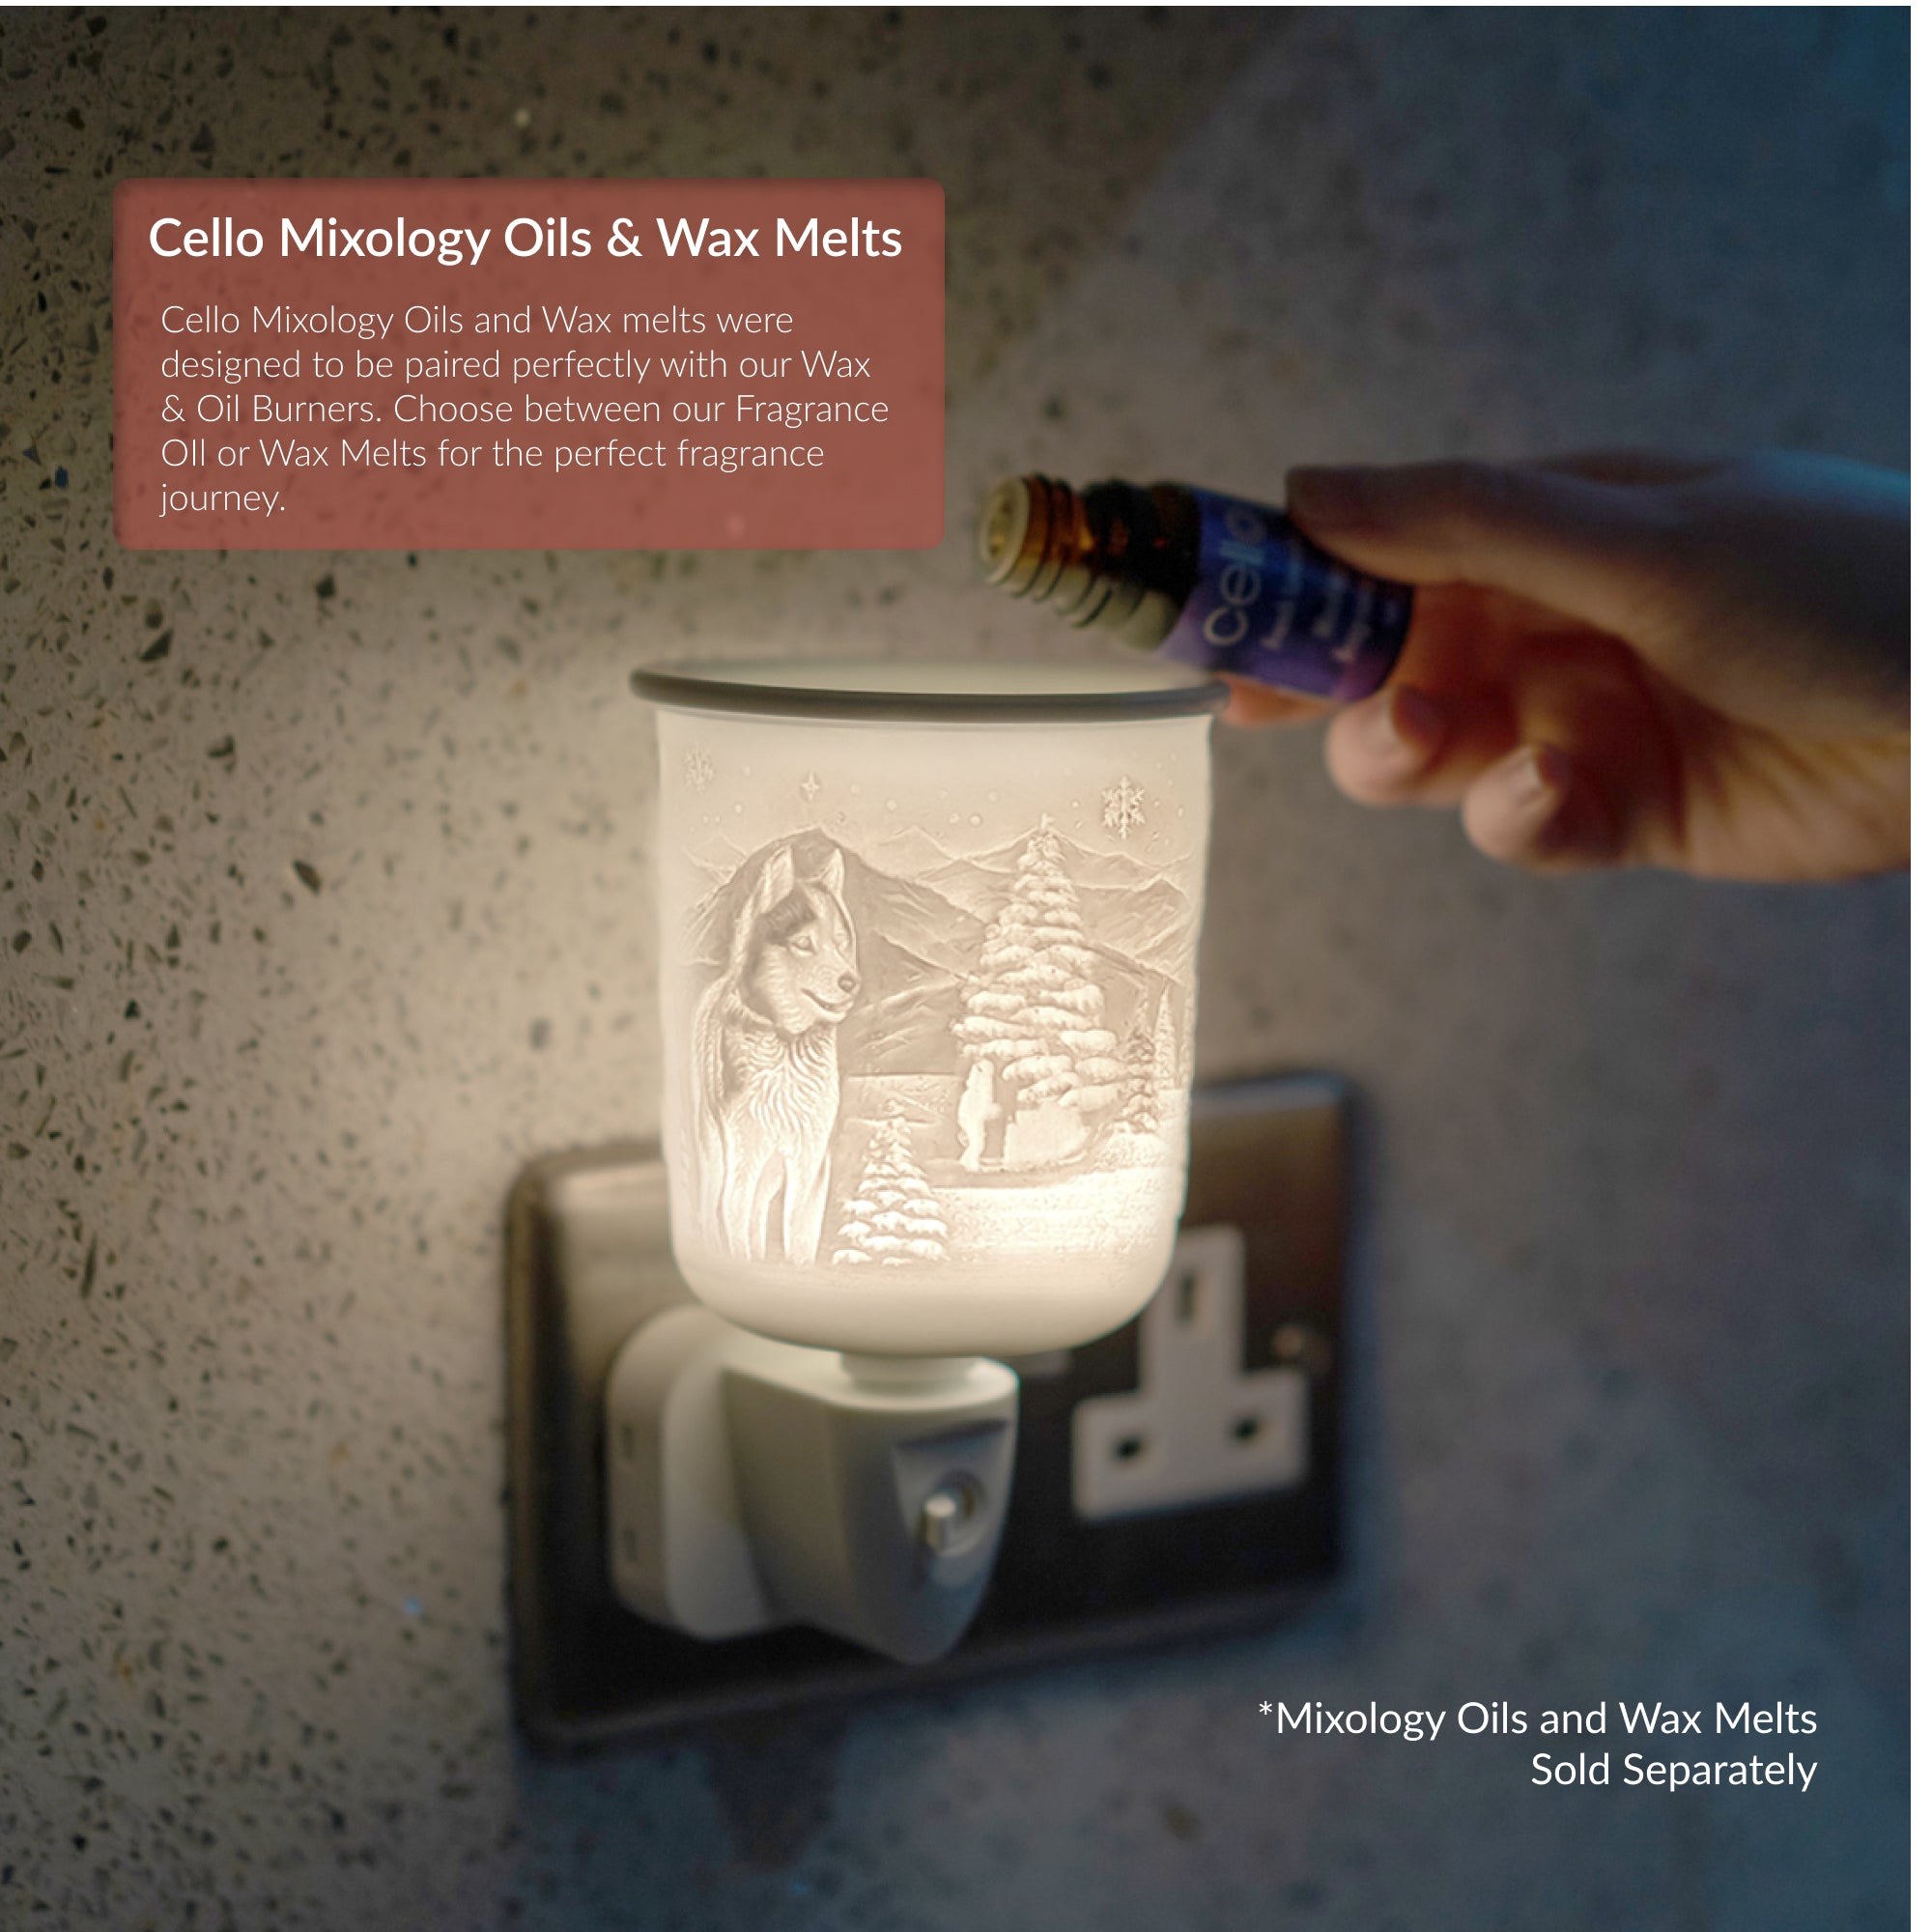 Cello - Porcelain Plug In Electric Warmer - Dog